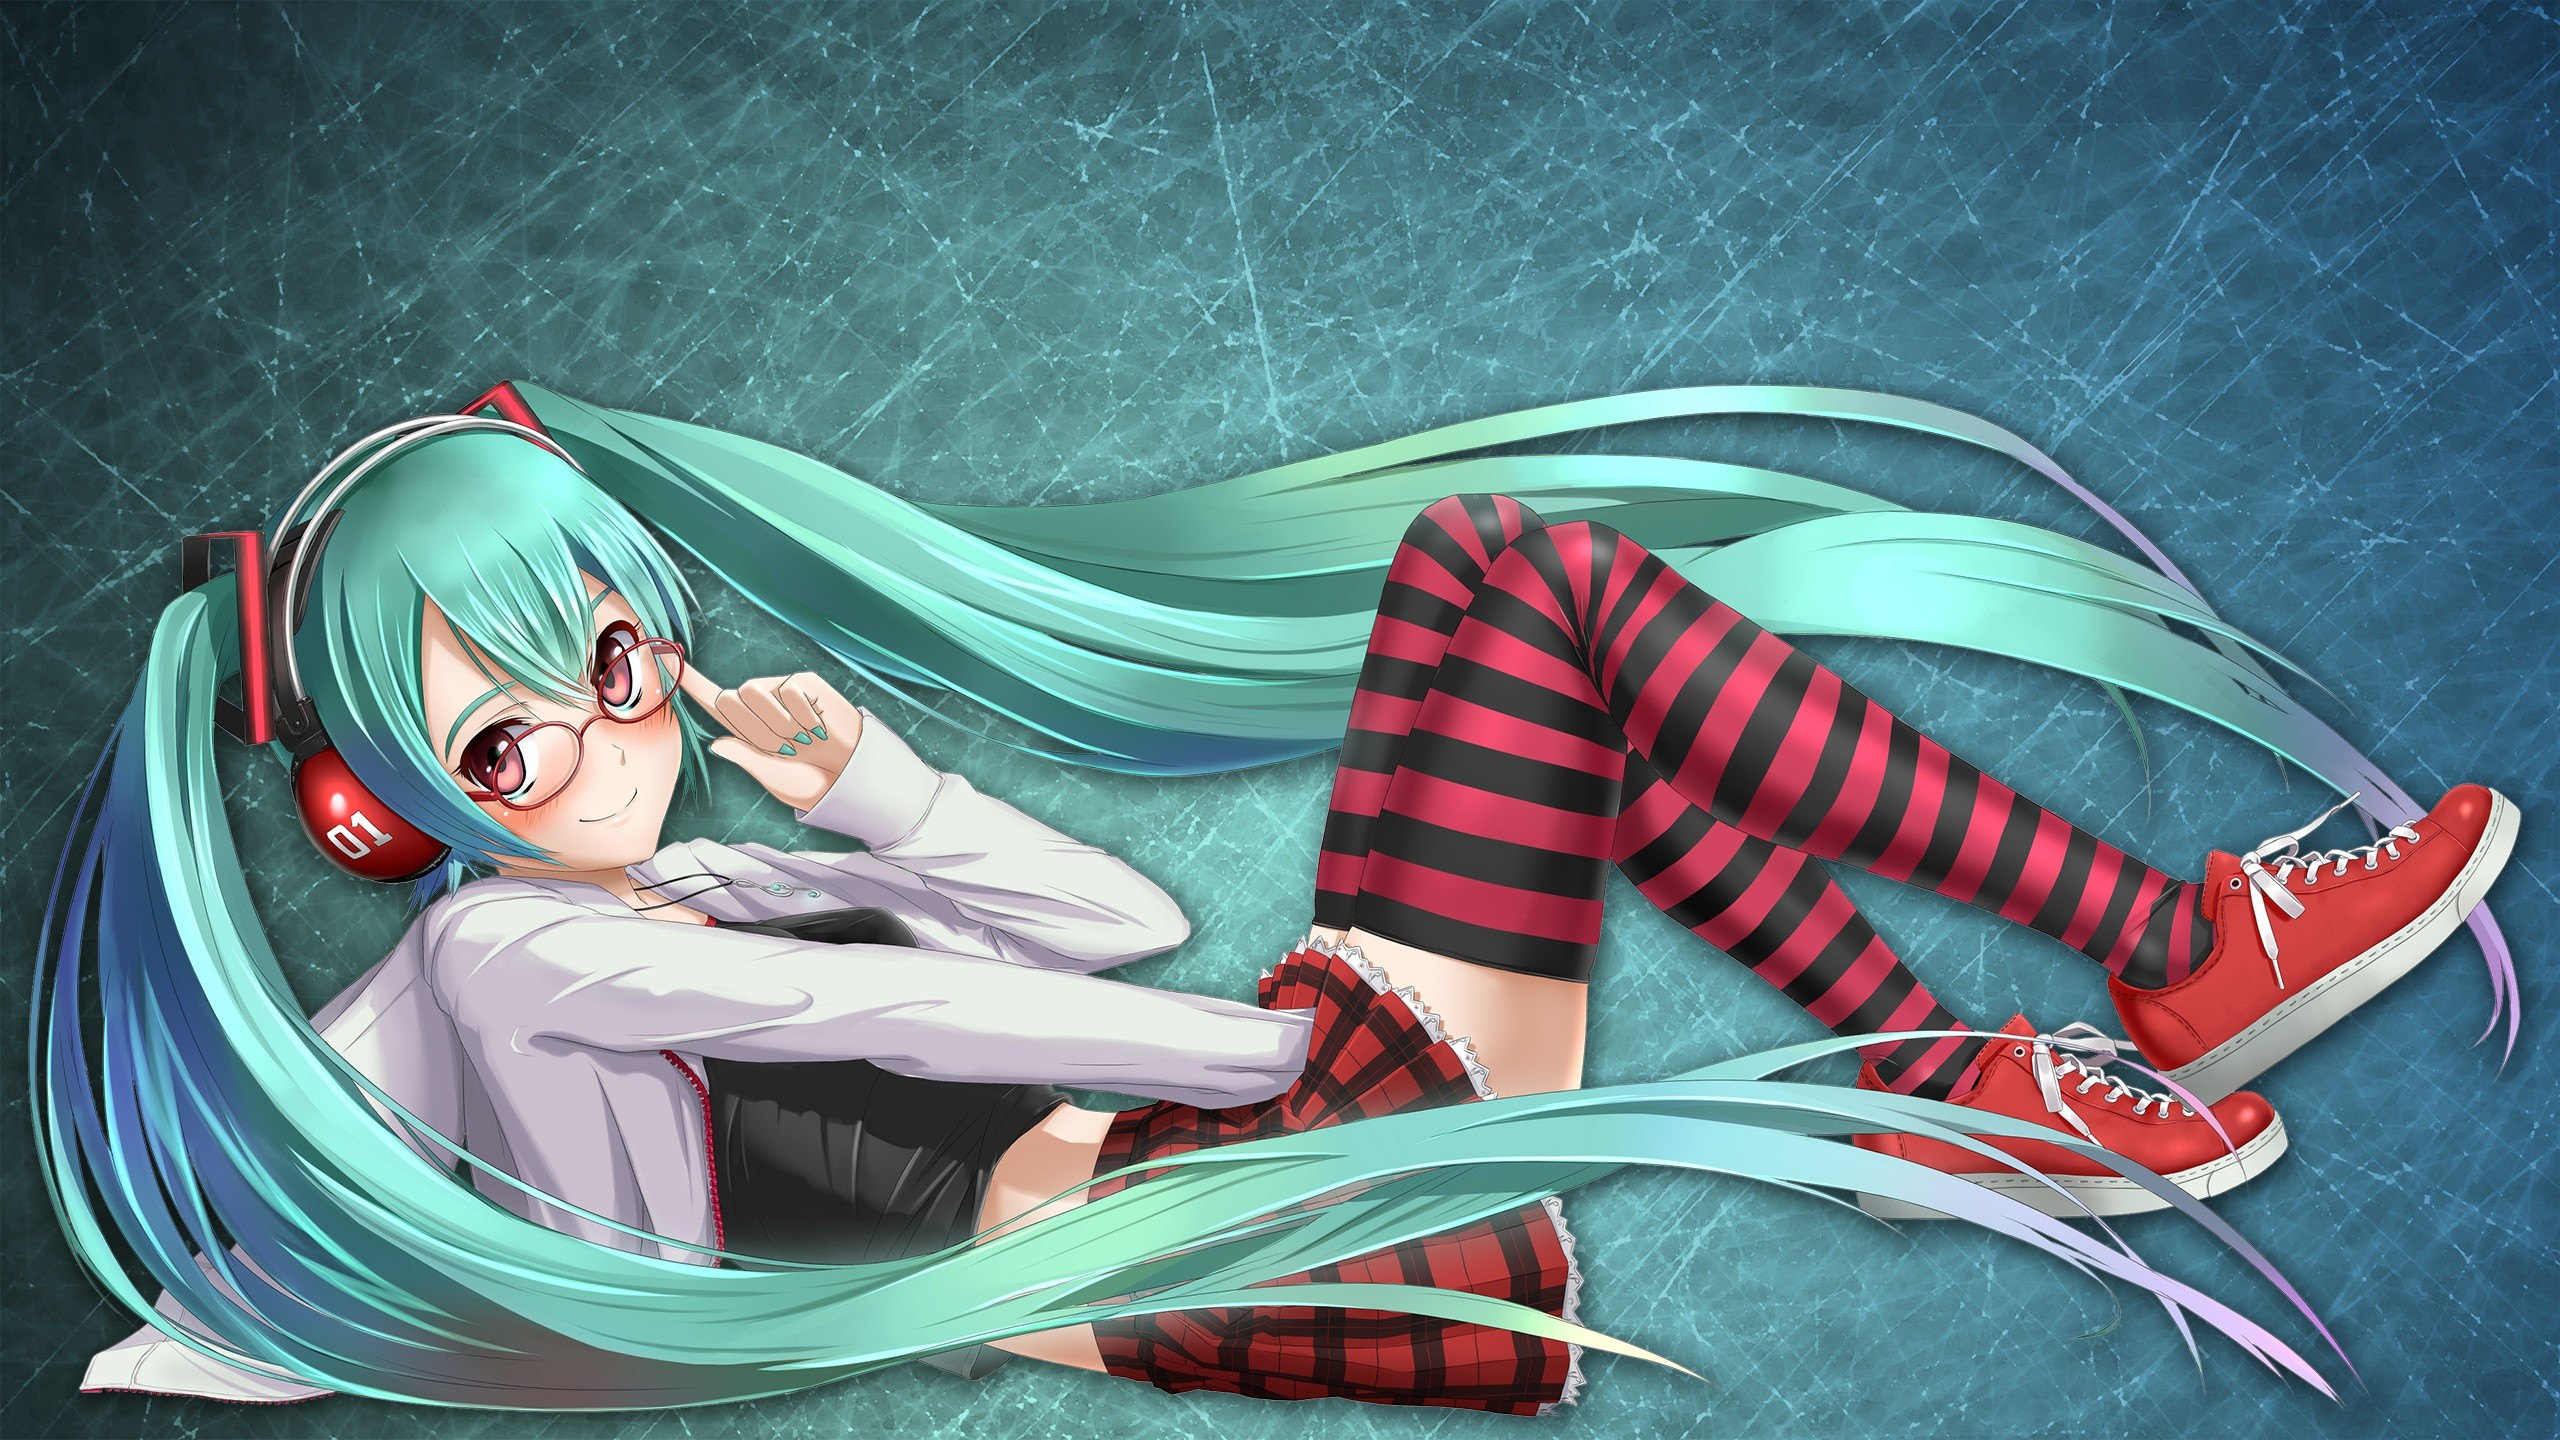 Anime 2560x1440 anime girls twintails stockings knee-highs striped skirt plaid headphones long hair lying down glasses women with glasses painted nails meganekko Hatsune Miku Vocaloid anime cyan hair smiling hand between legs striped stockings red shoes cyan nails looking at viewer women